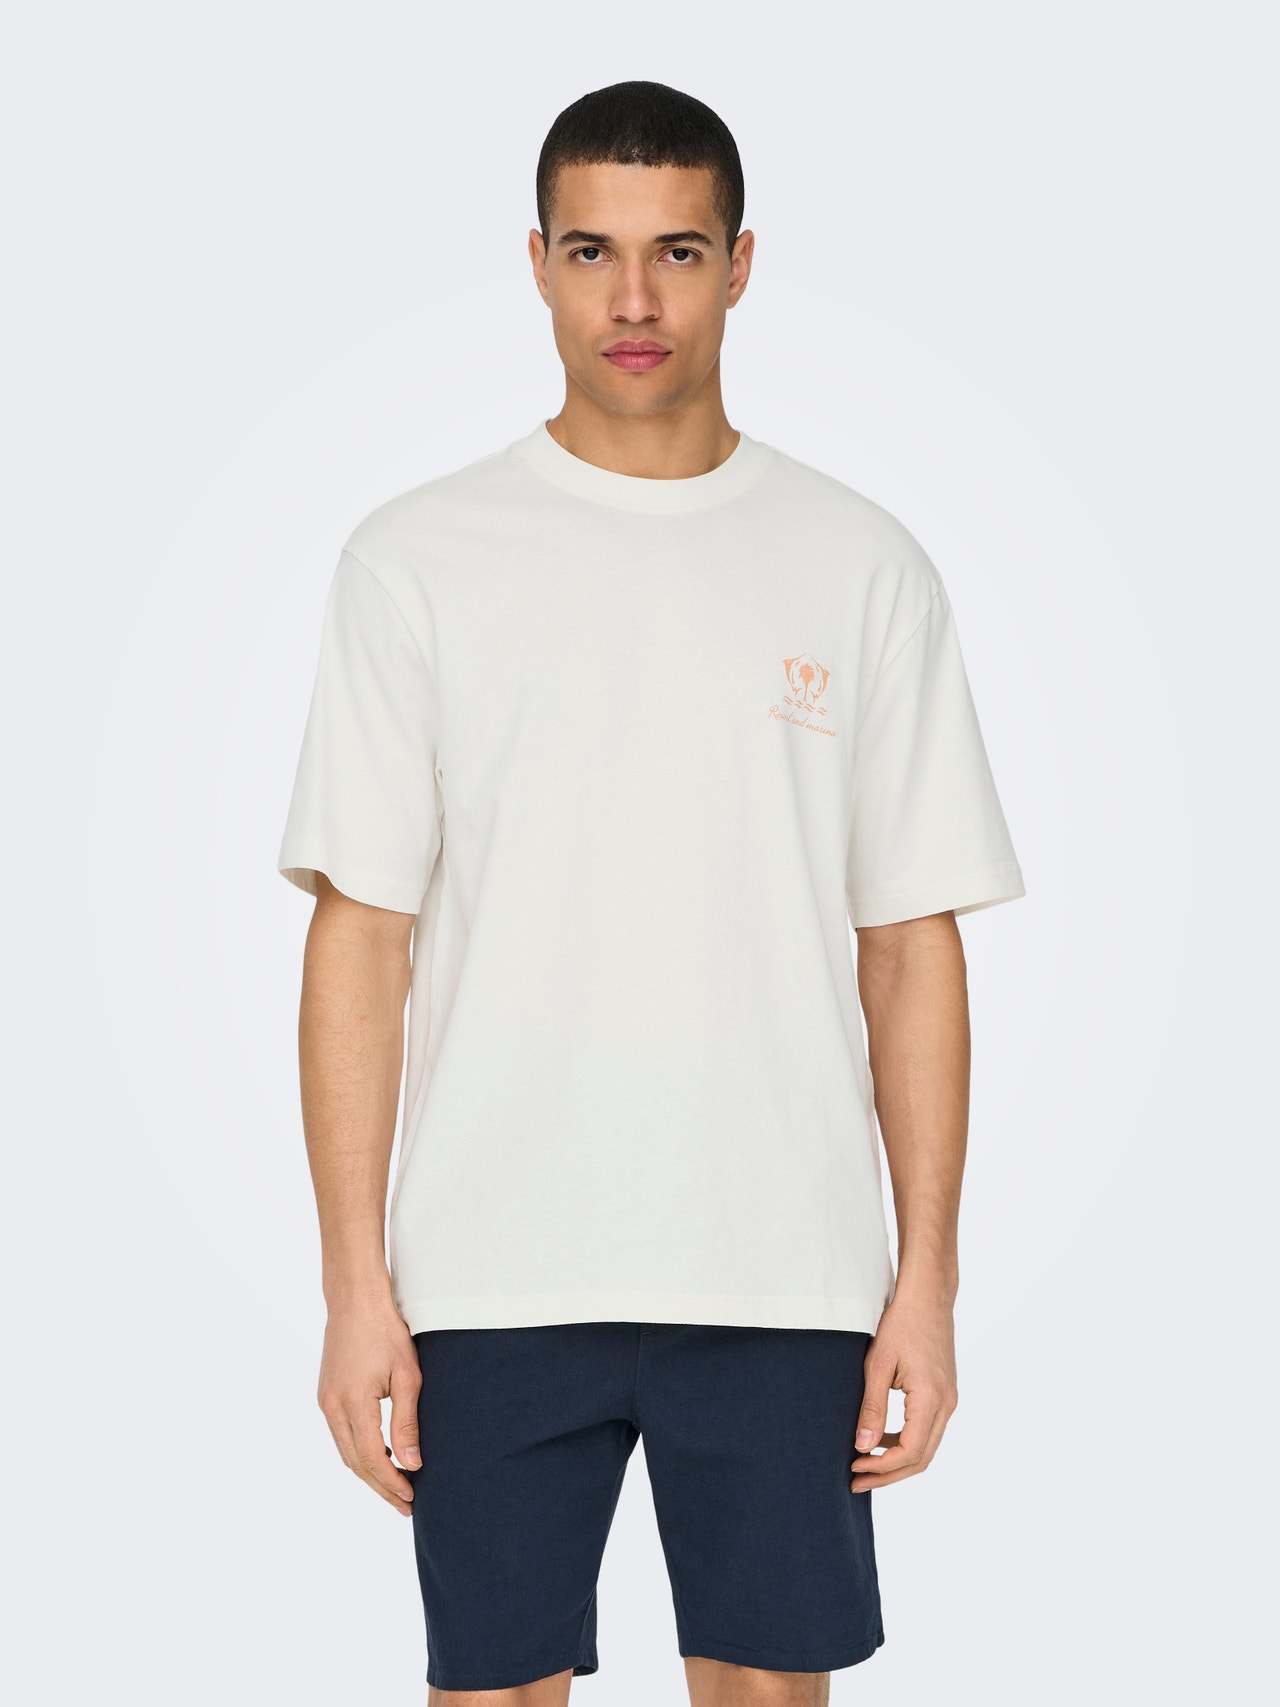 ONLY & SONS O-neck t-shirt with print -Bright White - 22029482